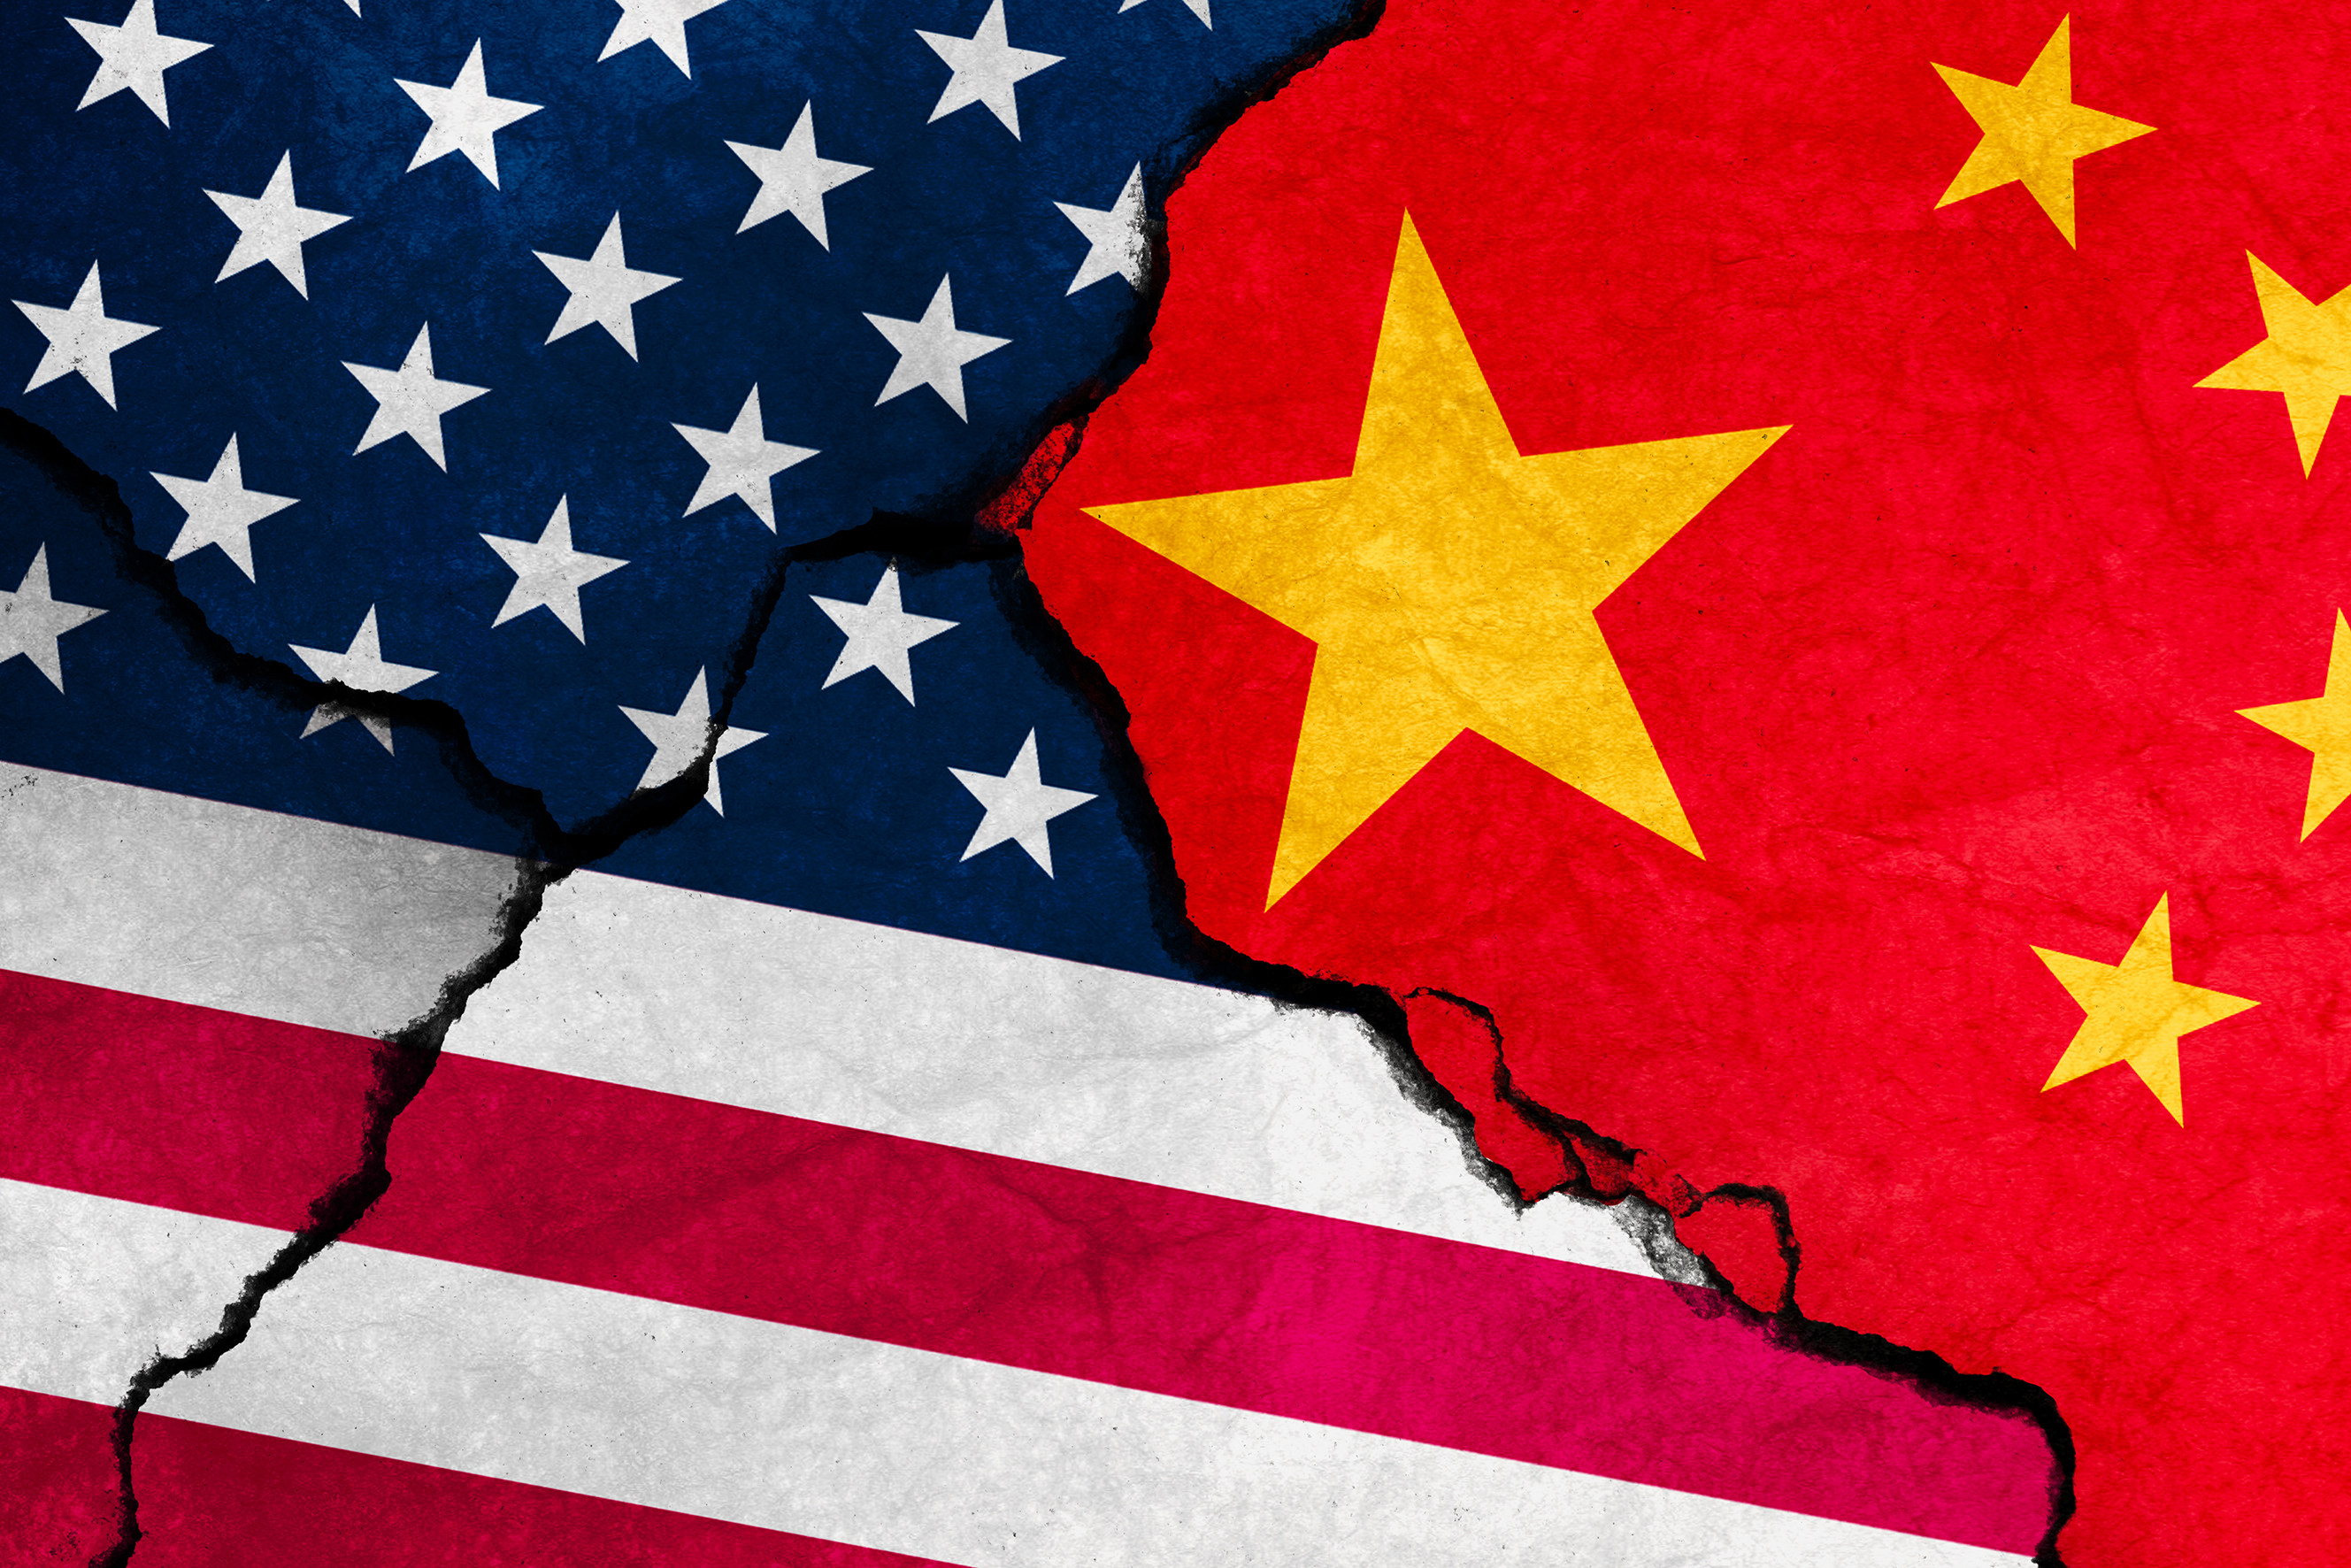 The US-China Science and Technology agreement was first signed by Jimmy Carter and Deng Xiaoping in 1979 after the countries established diplomatic ties. Photo: Shutterstock